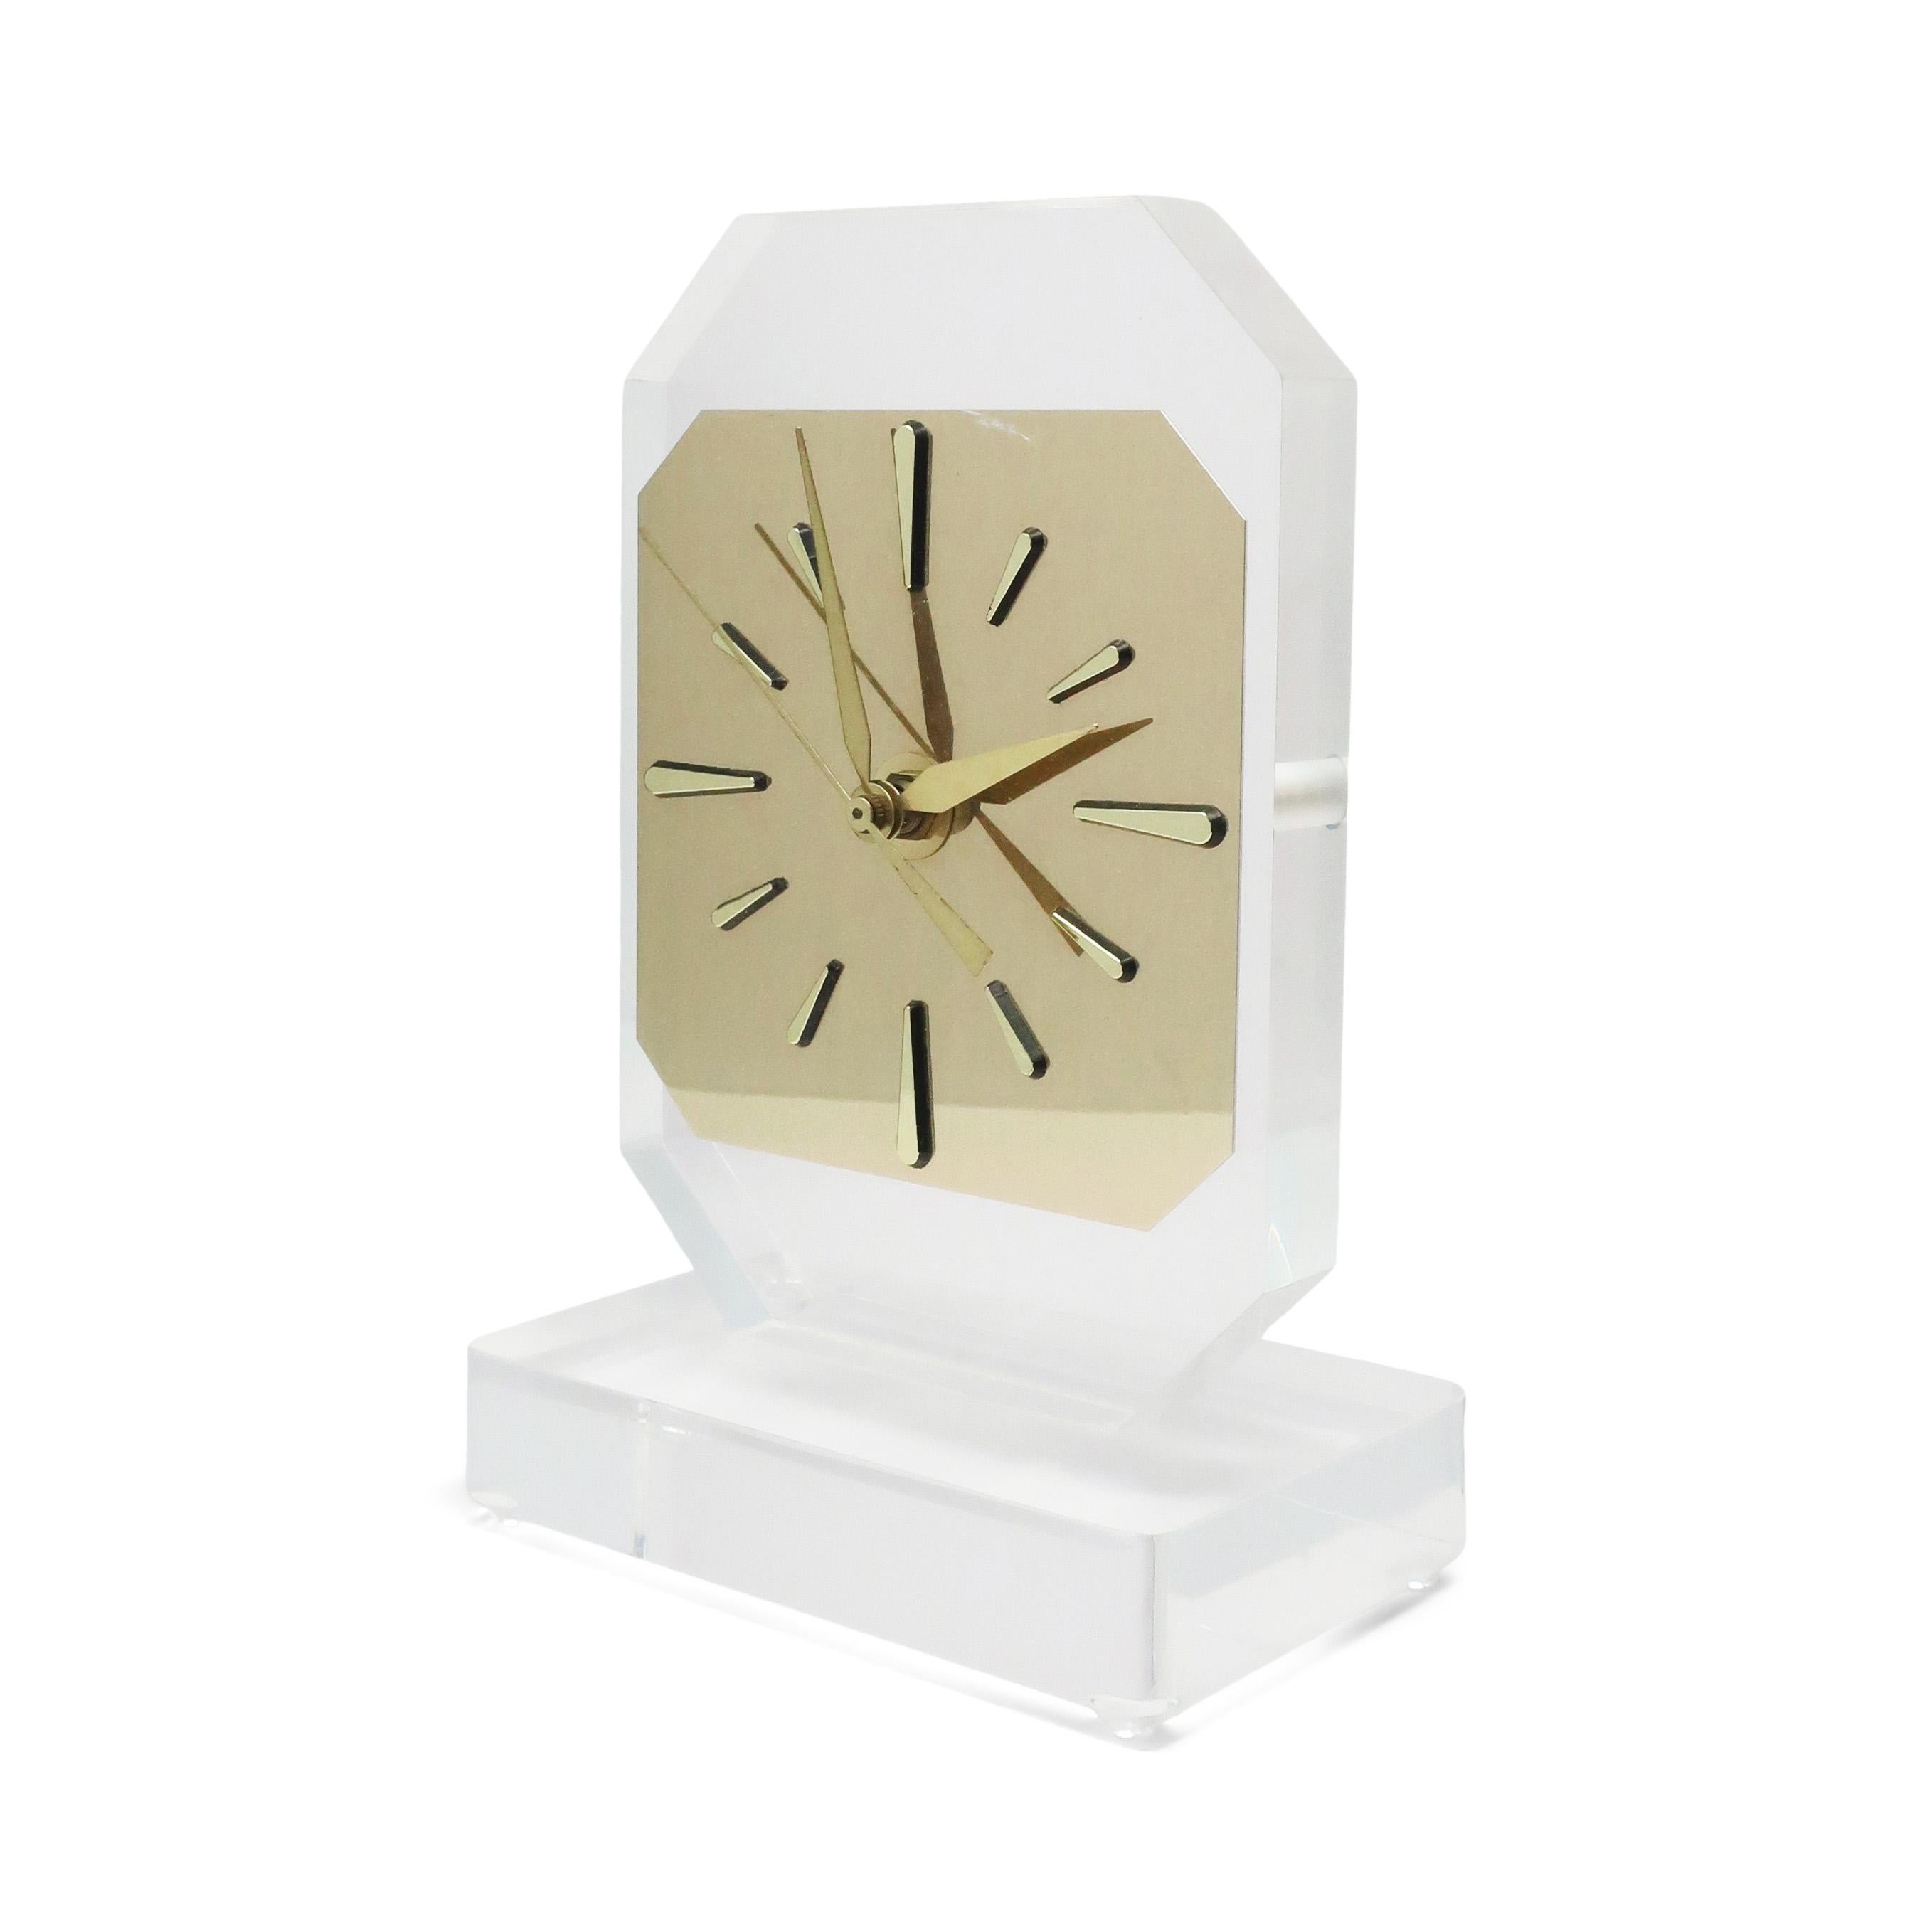 With a rectangular base, tall body, and brass colored face and hands, this sleek lucite desk, table or mantle clock has clean lines, simple elegance, and a perfect modern sophistication.

In excellent condition and works perfectly.

Measures: